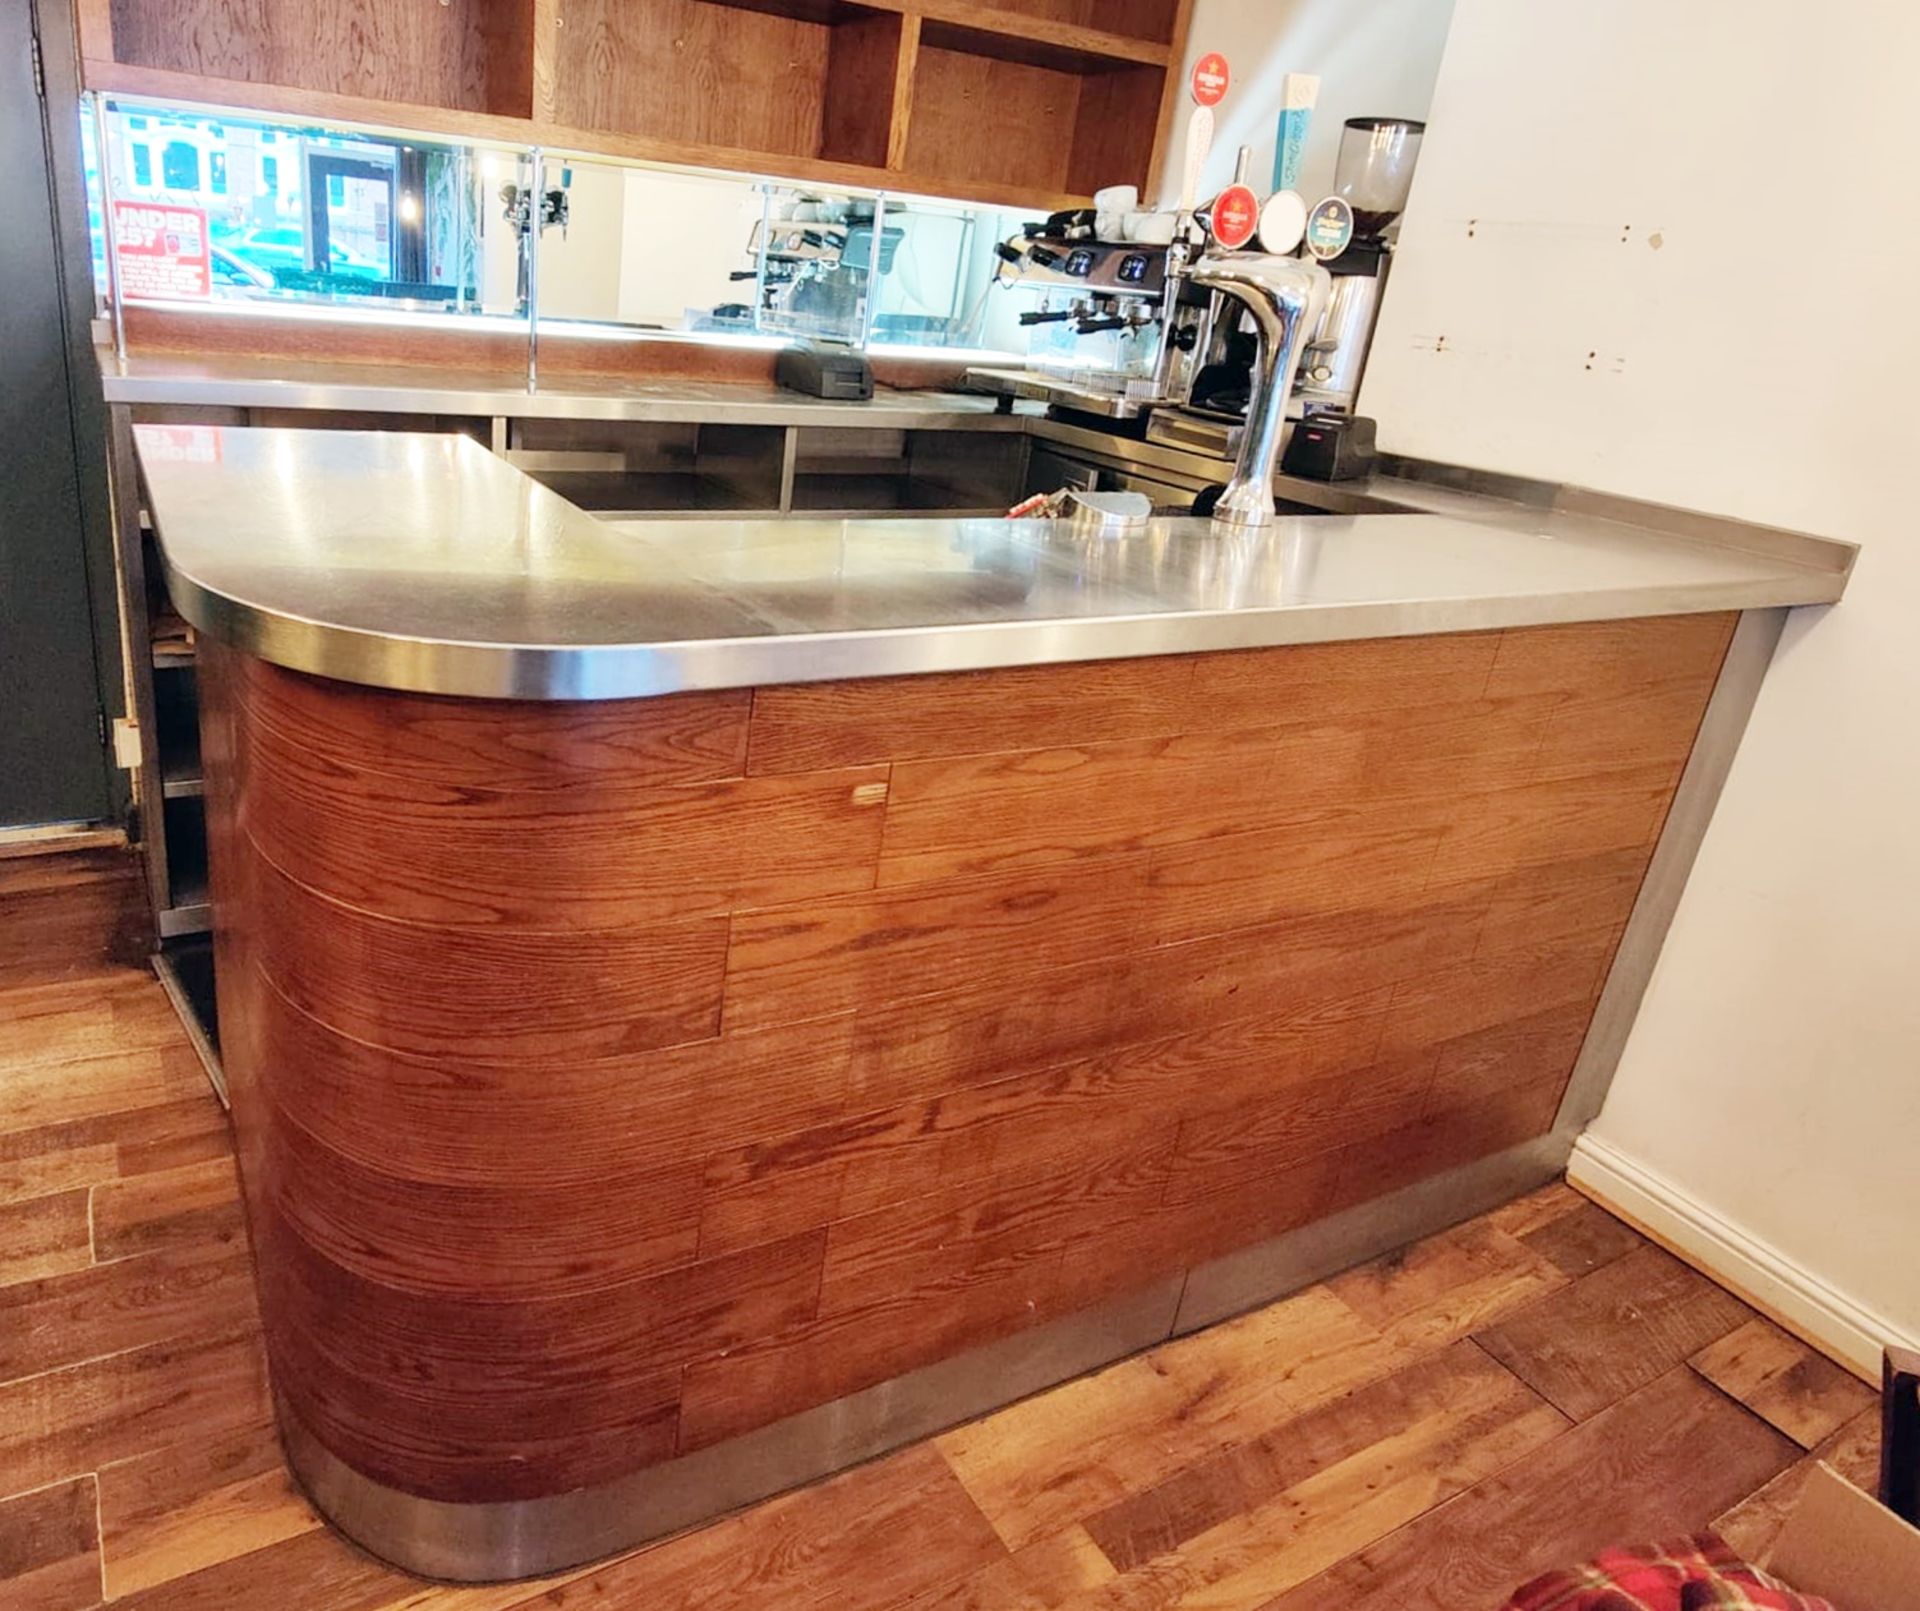 1 x Contemporary Curved Wooden Drinks Bar Featuring a Stainless Steel Bartop and Backbar - Image 2 of 22